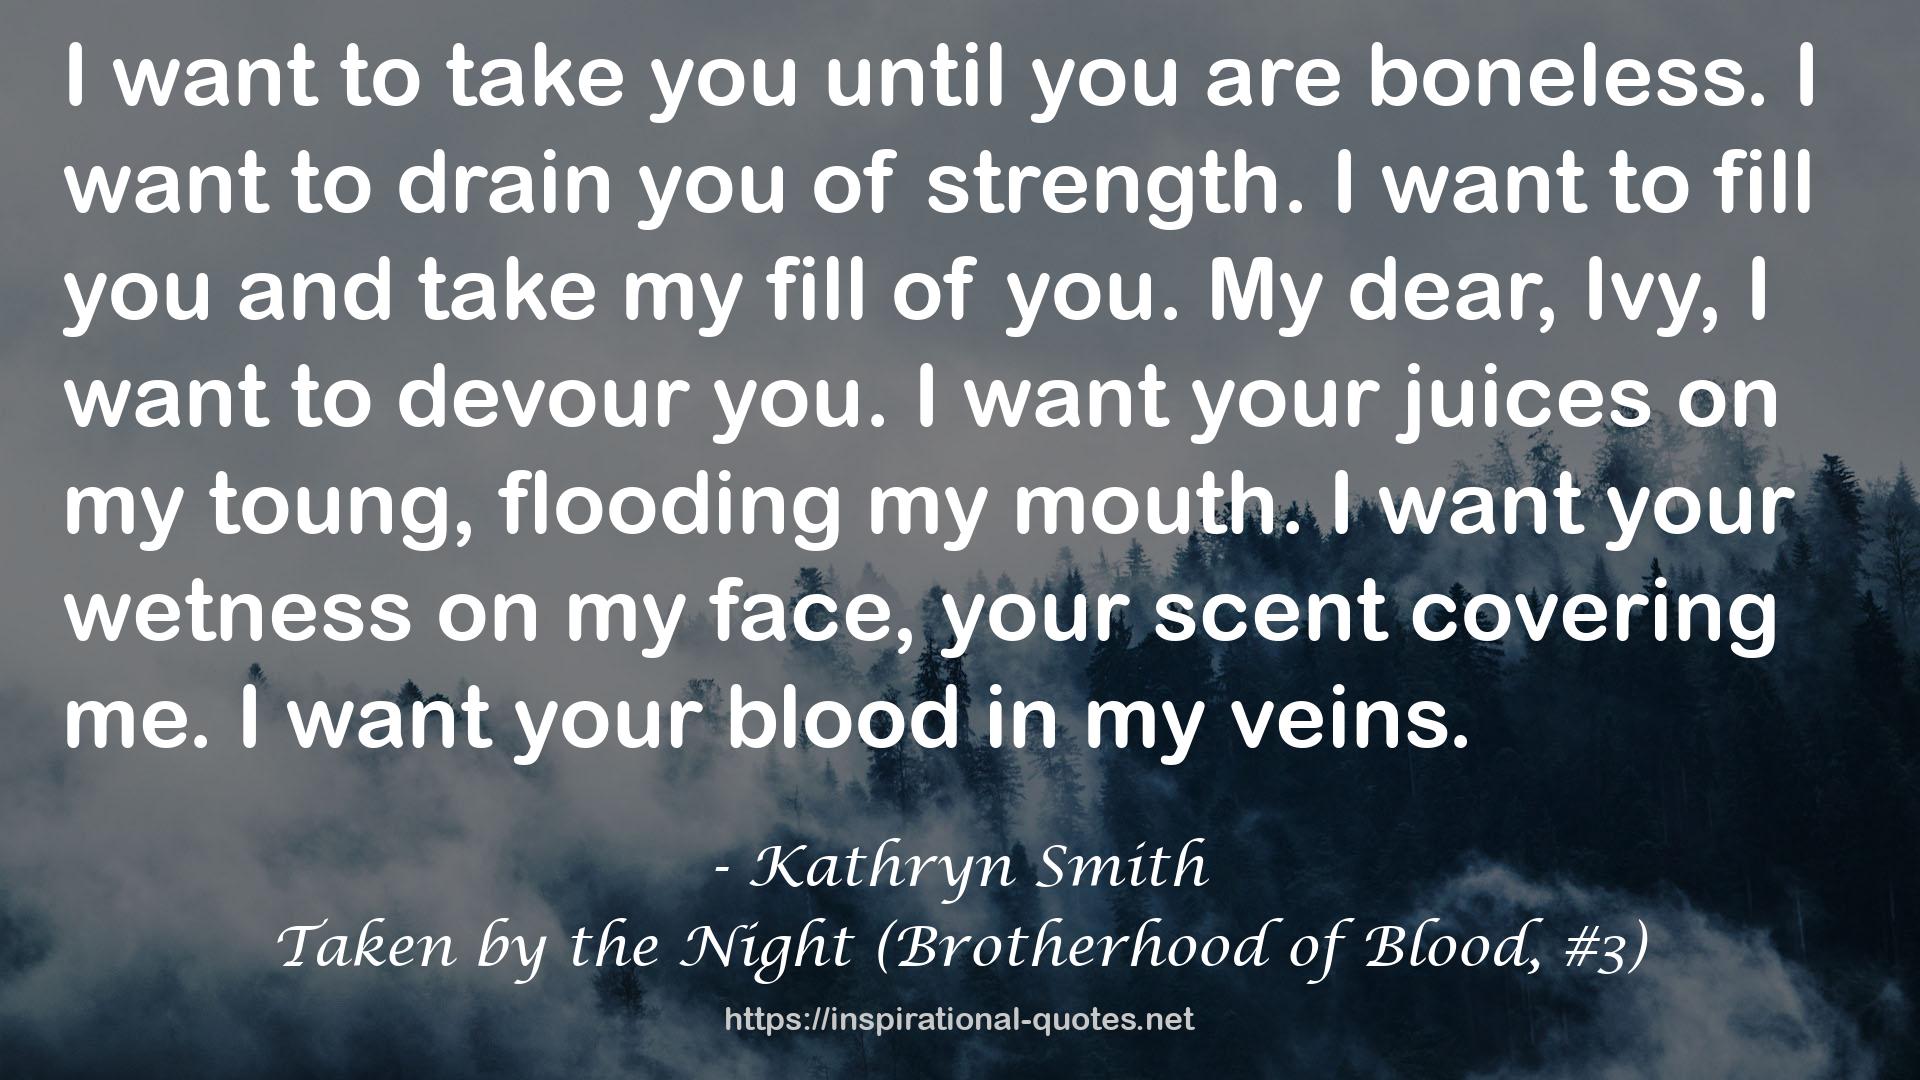 Taken by the Night (Brotherhood of Blood, #3) QUOTES